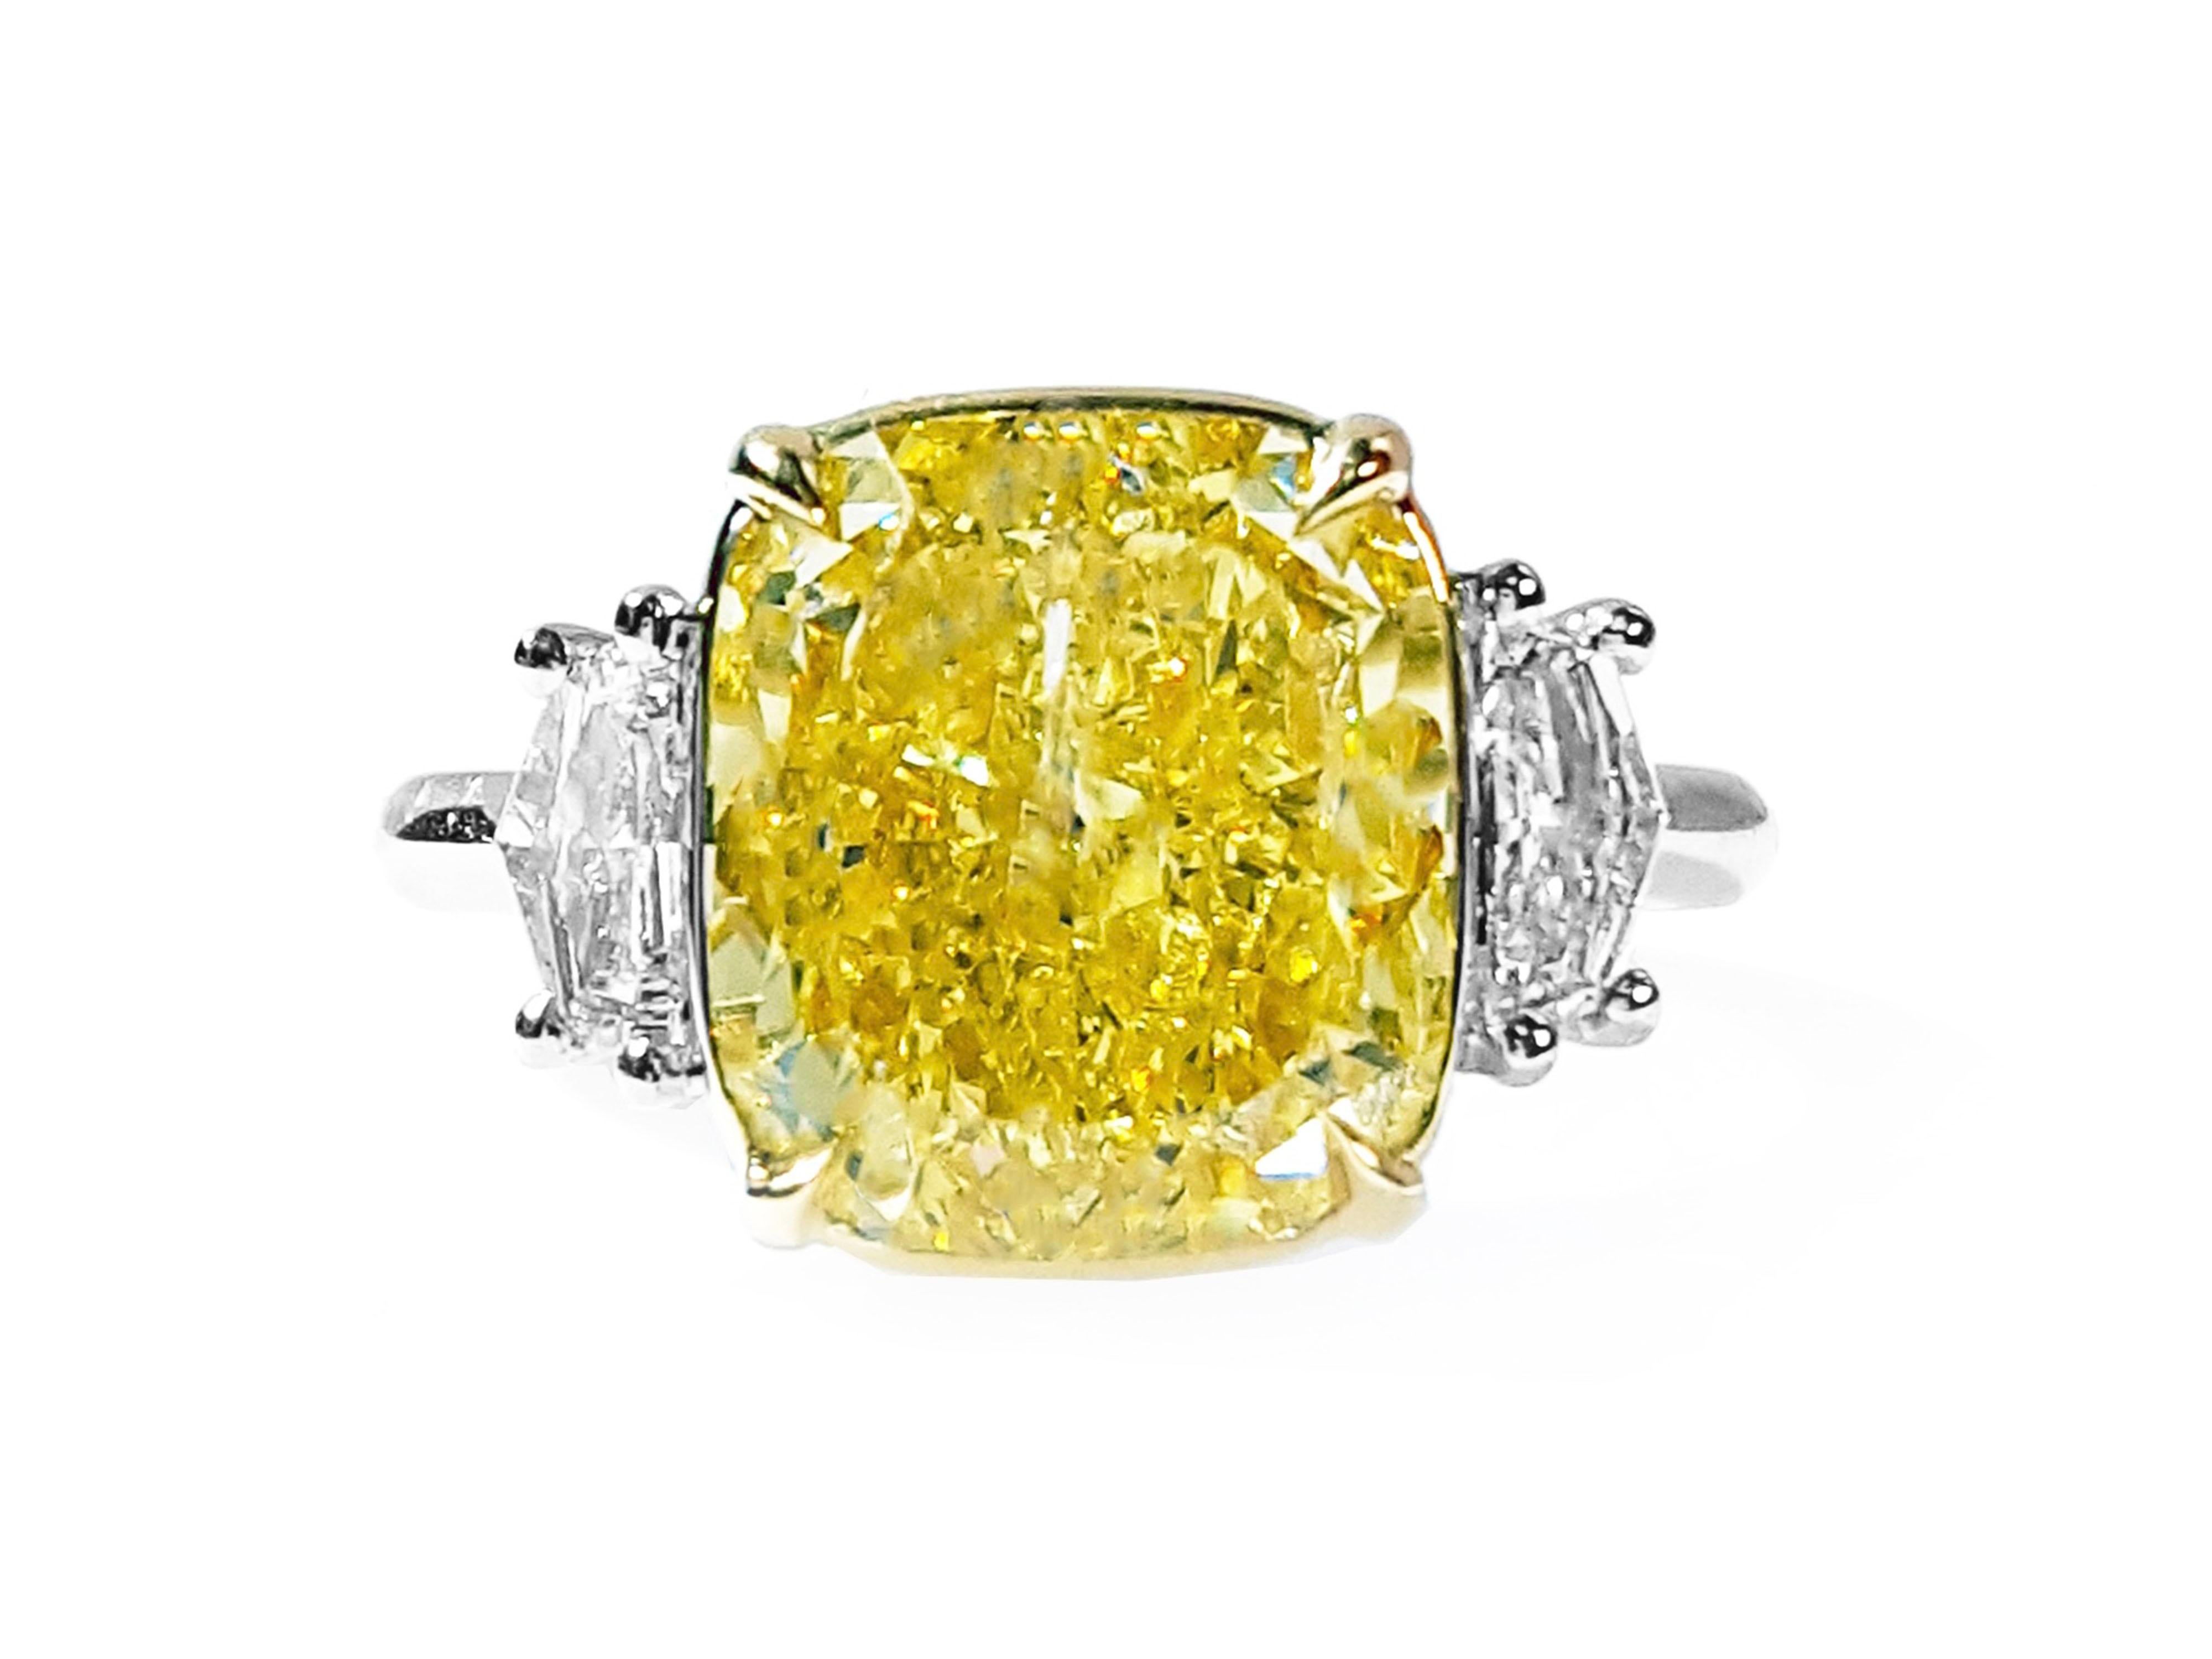 This absolutely stunning engagement ring Three-Stone style showcasing a Fancy Intense Yellow 6.67 carat Cushion cut diamond that has been certified by GIA. Flanked by two Cadillac cut diamonds total weight 0.48 carat, D color, VS clarity. The